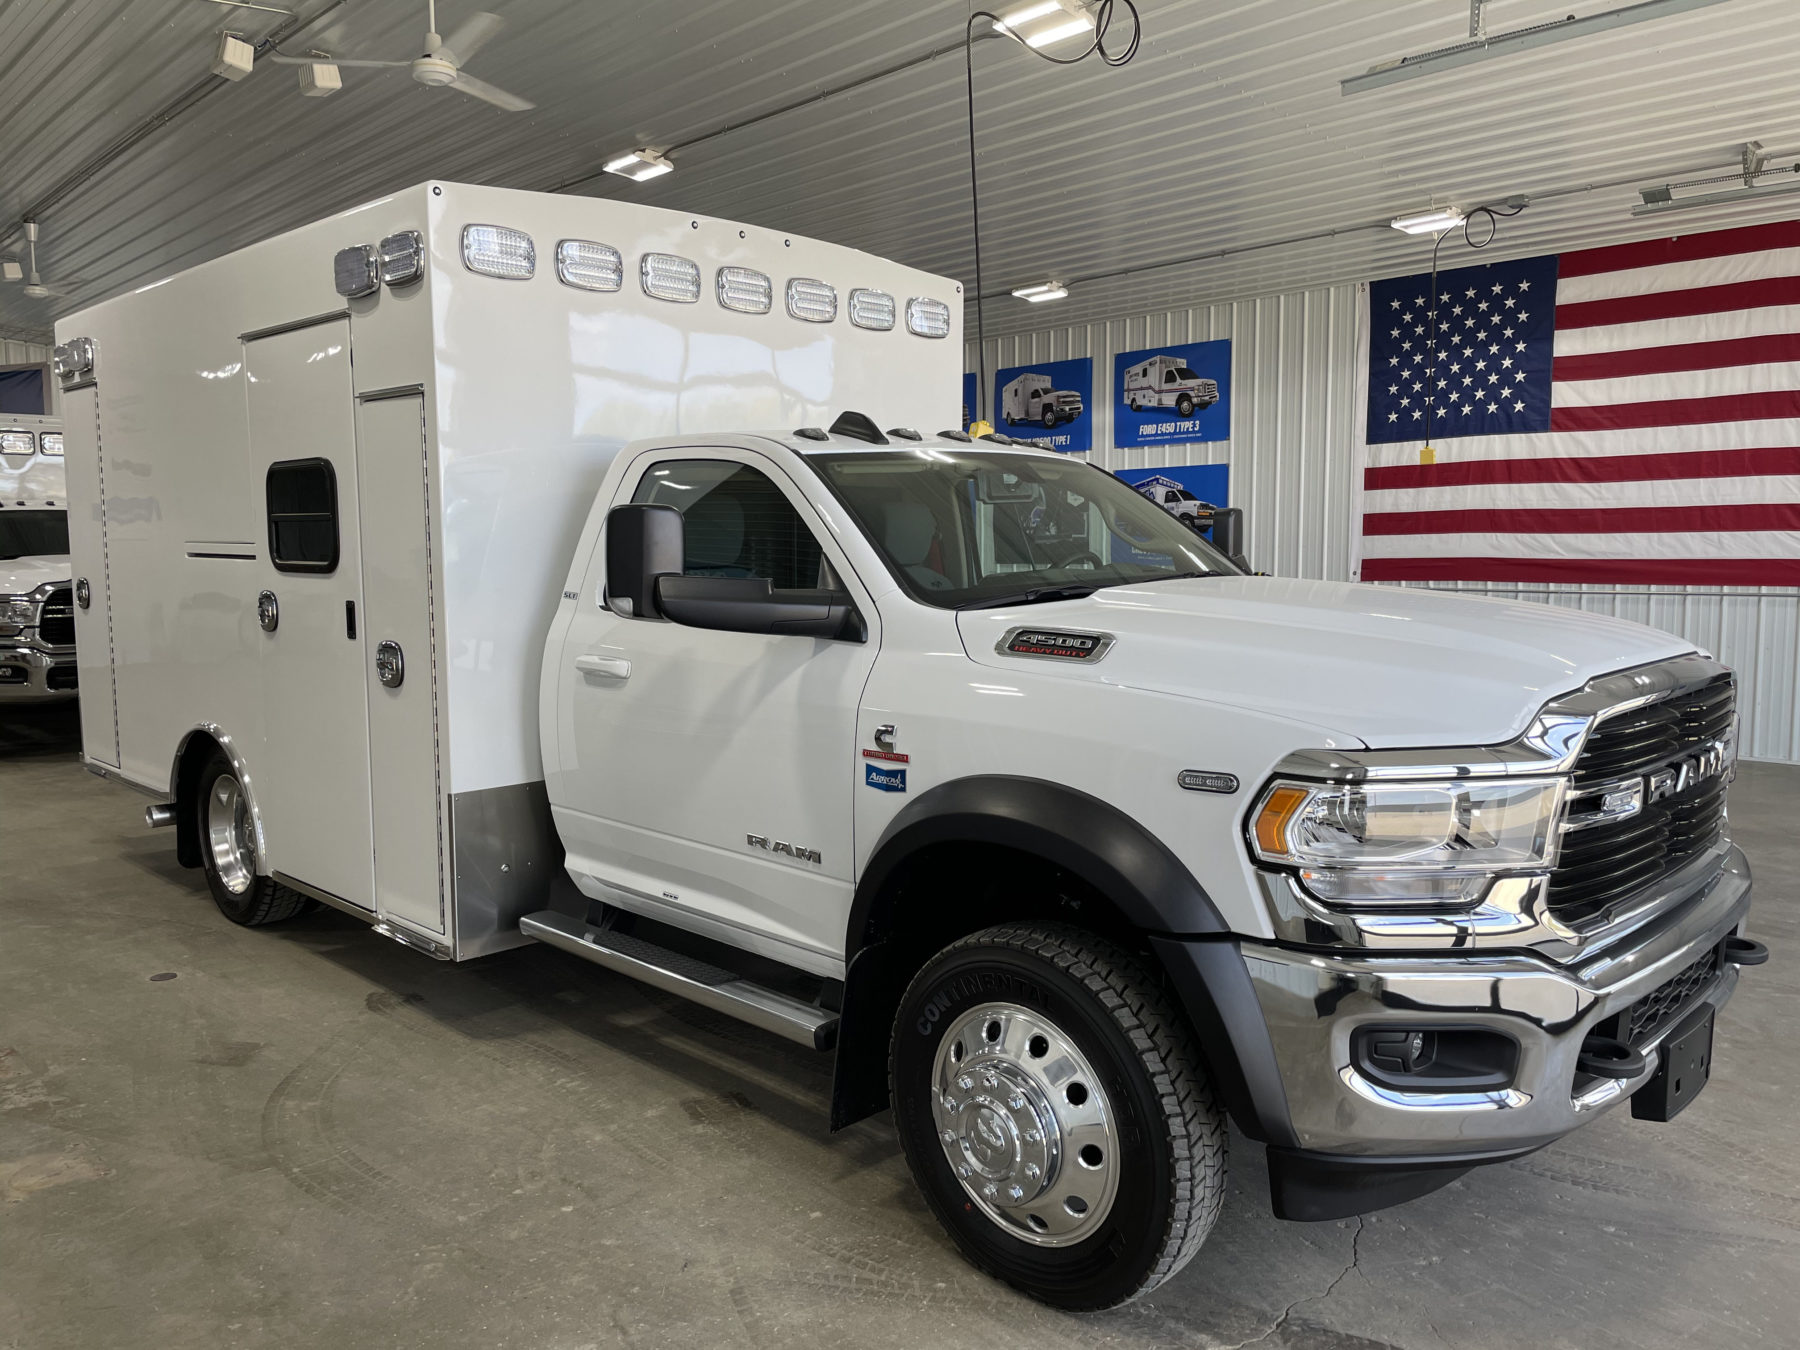 2020 Ram 4500 4x4 Heavy Duty Ambulance For Sale – Picture 1